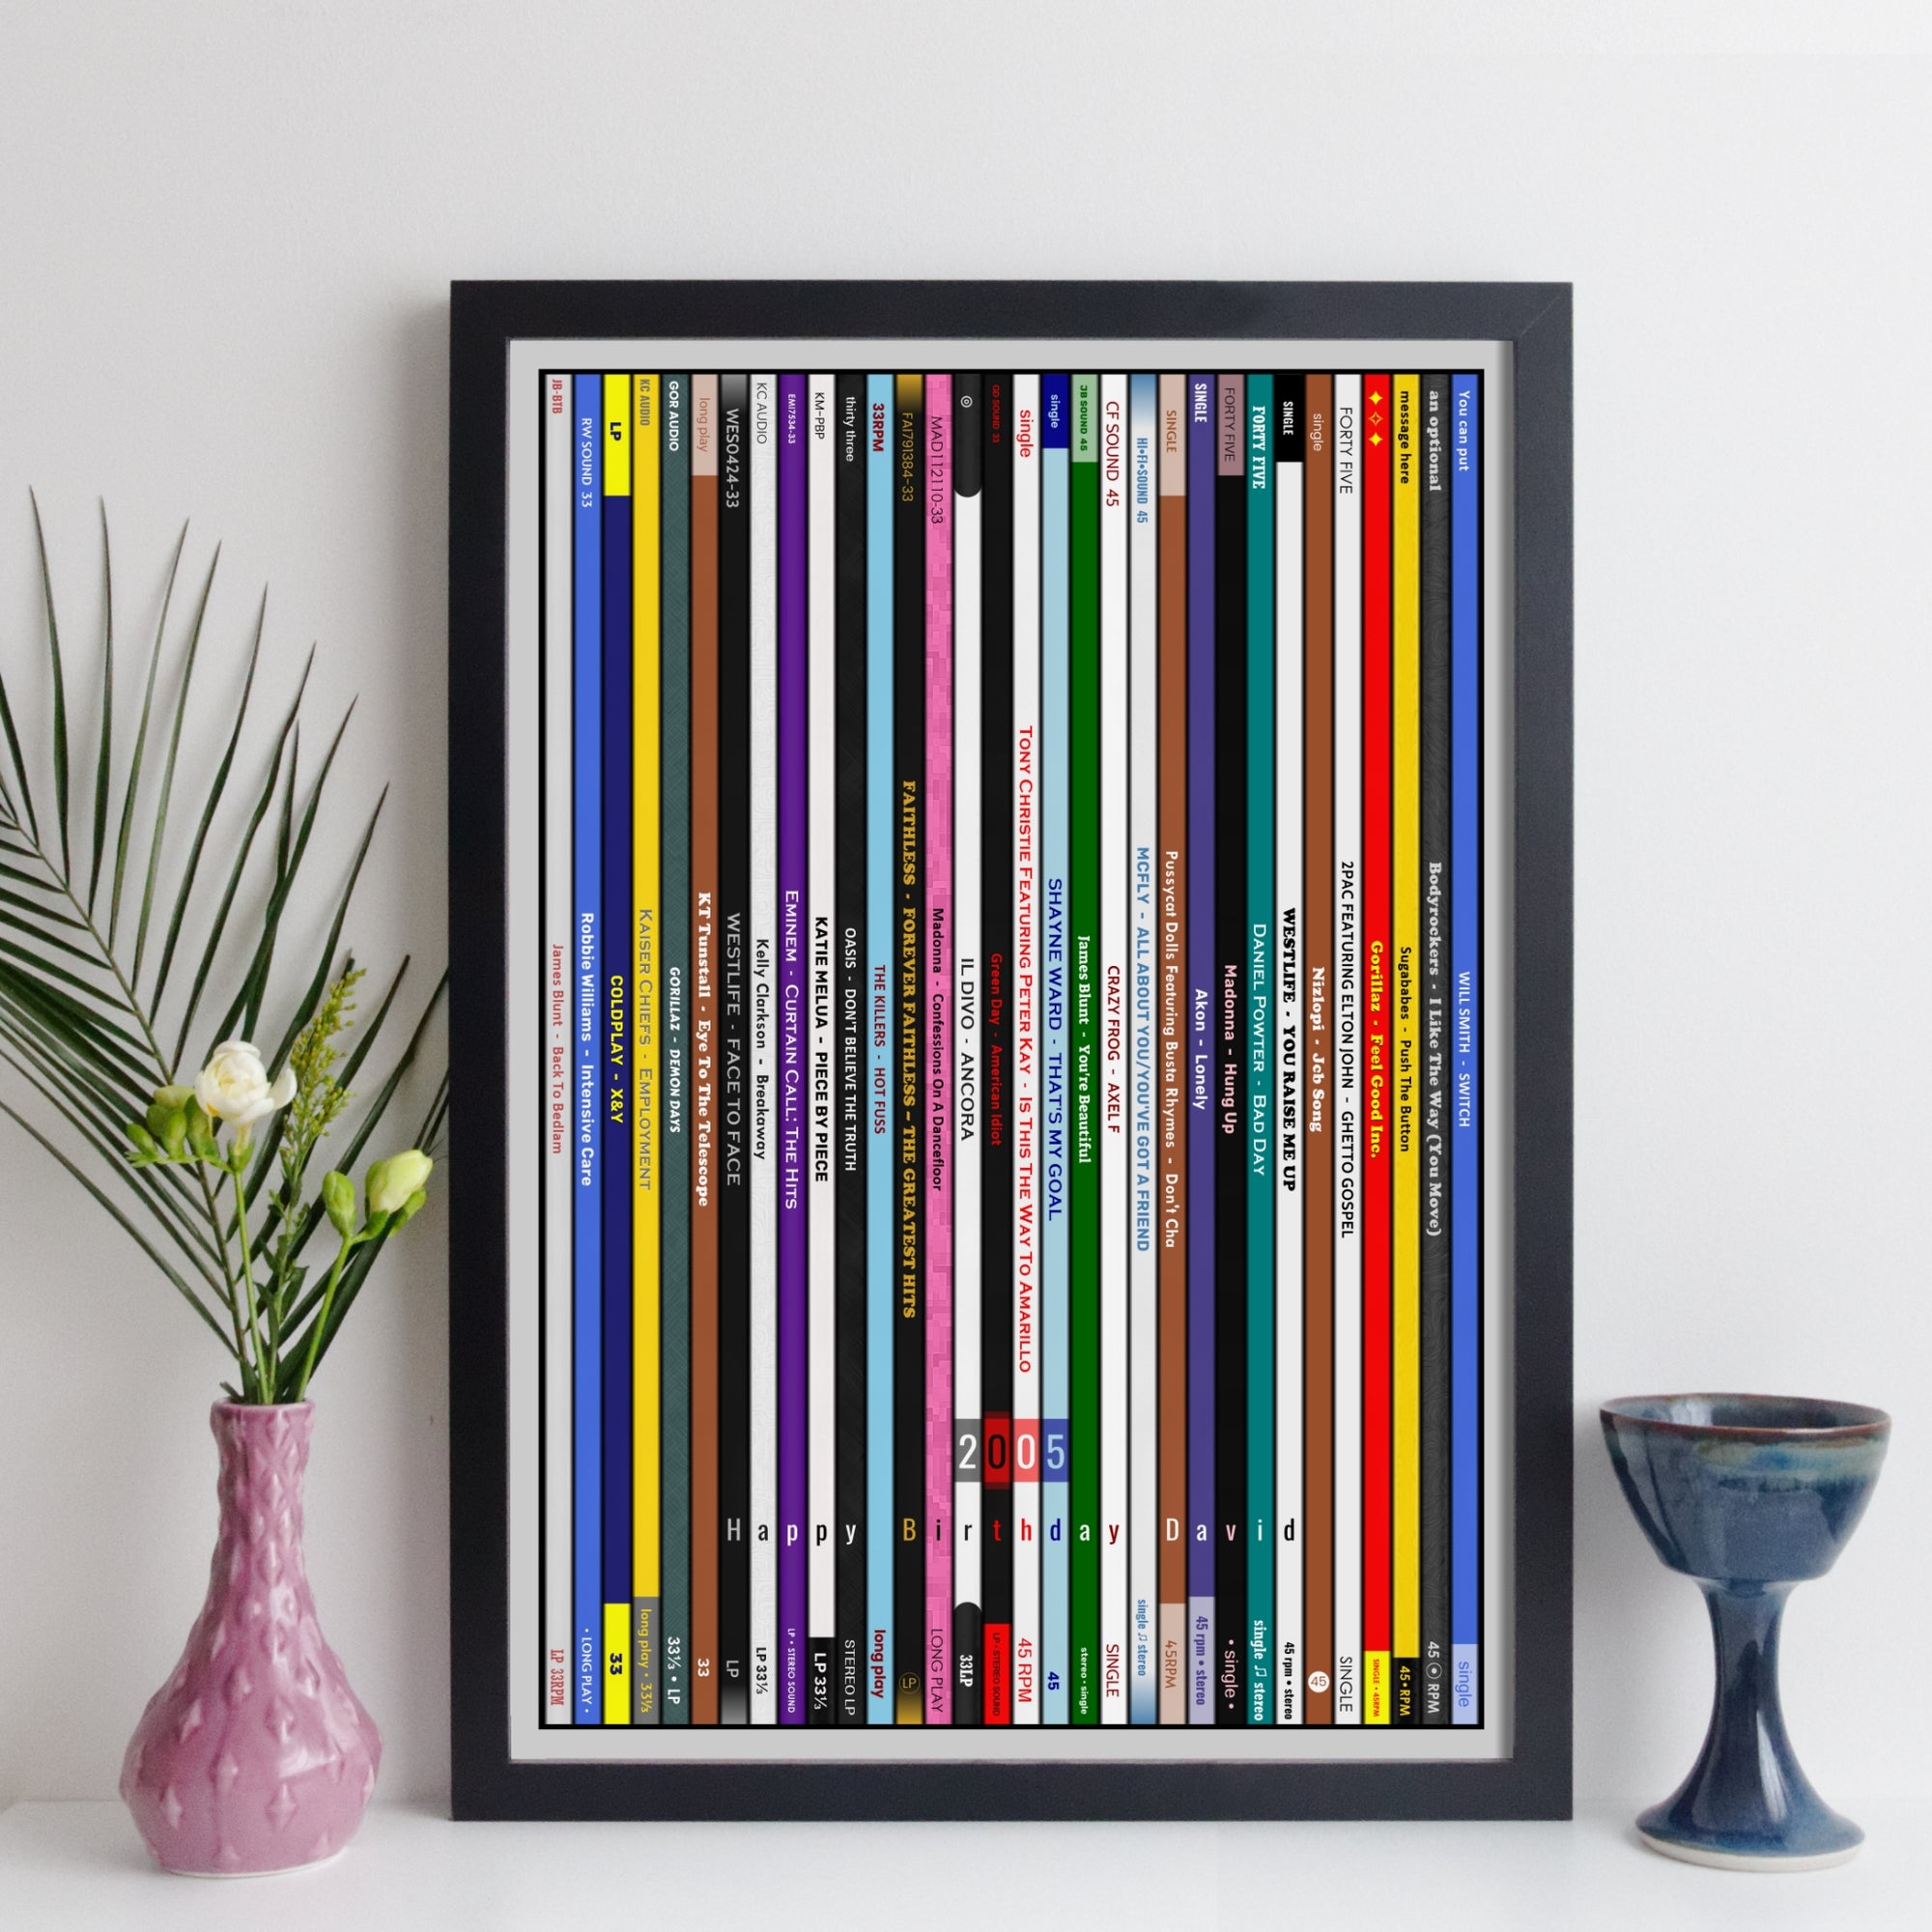 Personalised Music Print - 2005 UK Record Collection Print - birthday gift idea